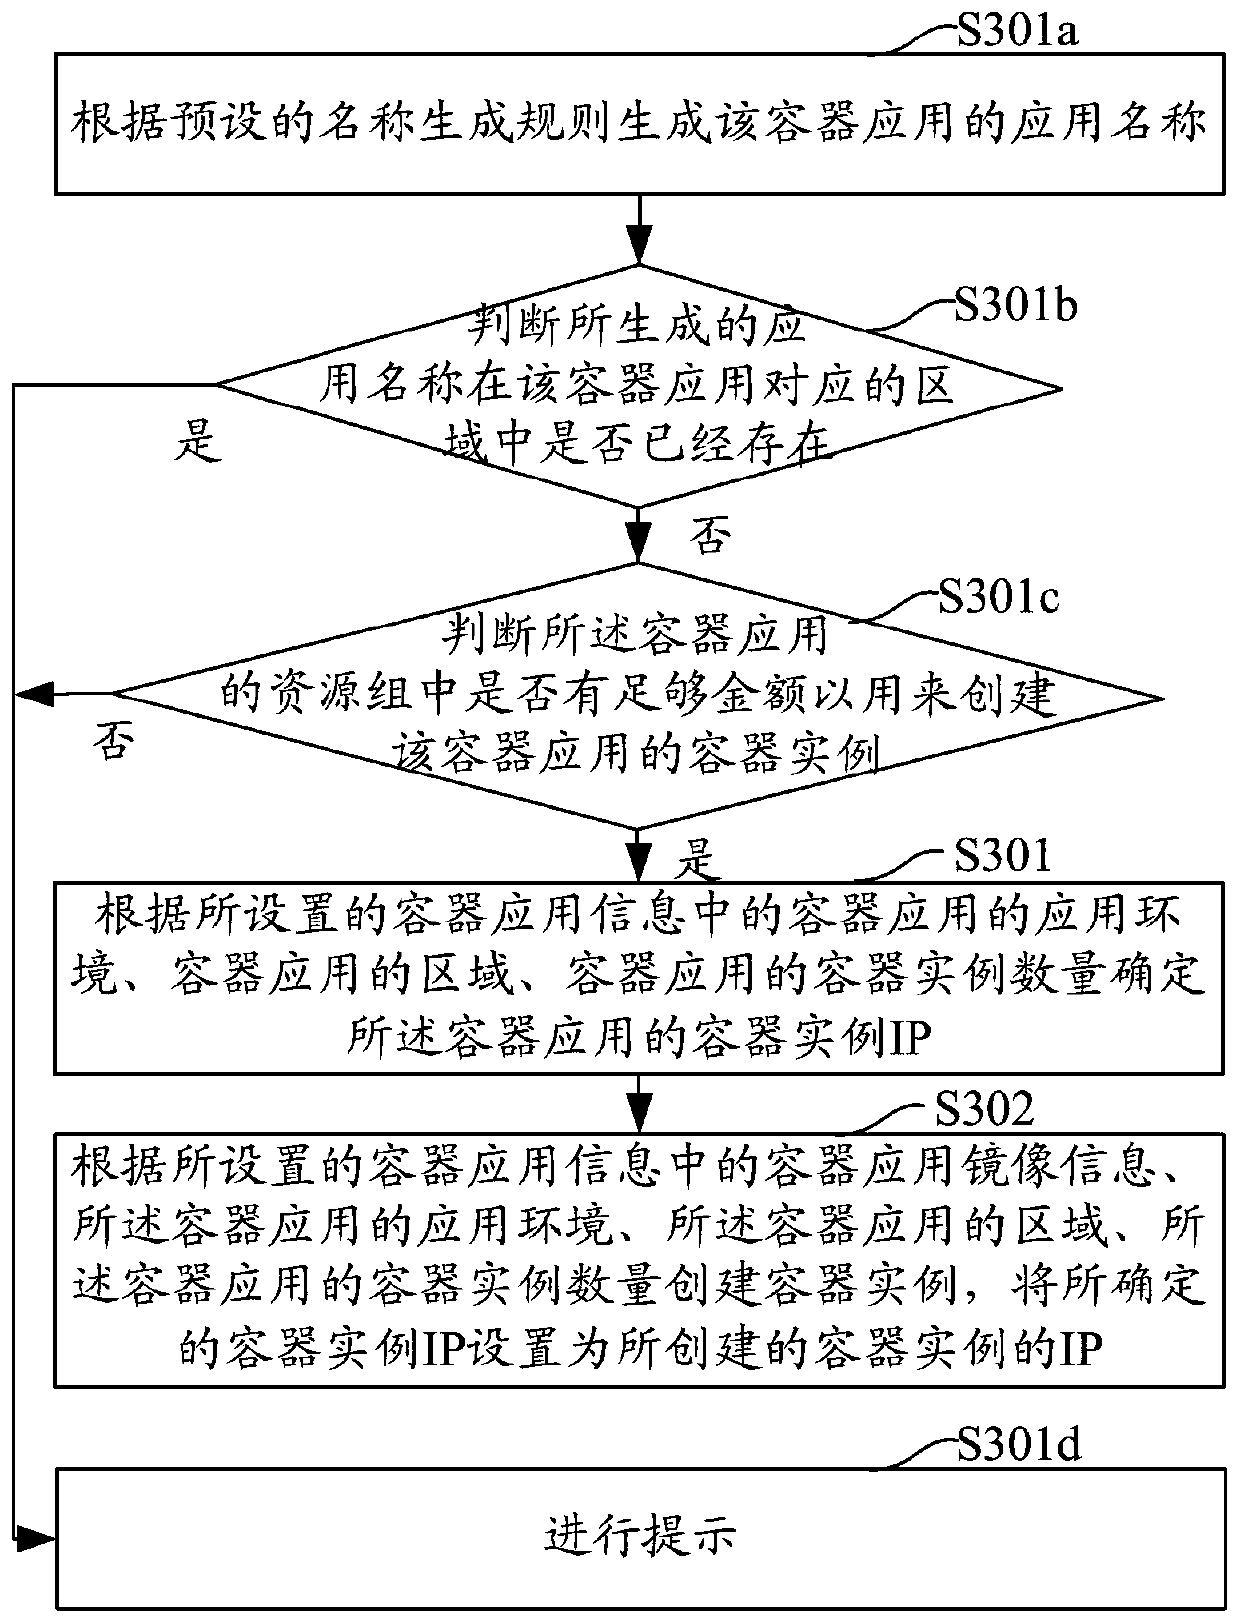 Load balancing application creation method and device, computer device and storage medium